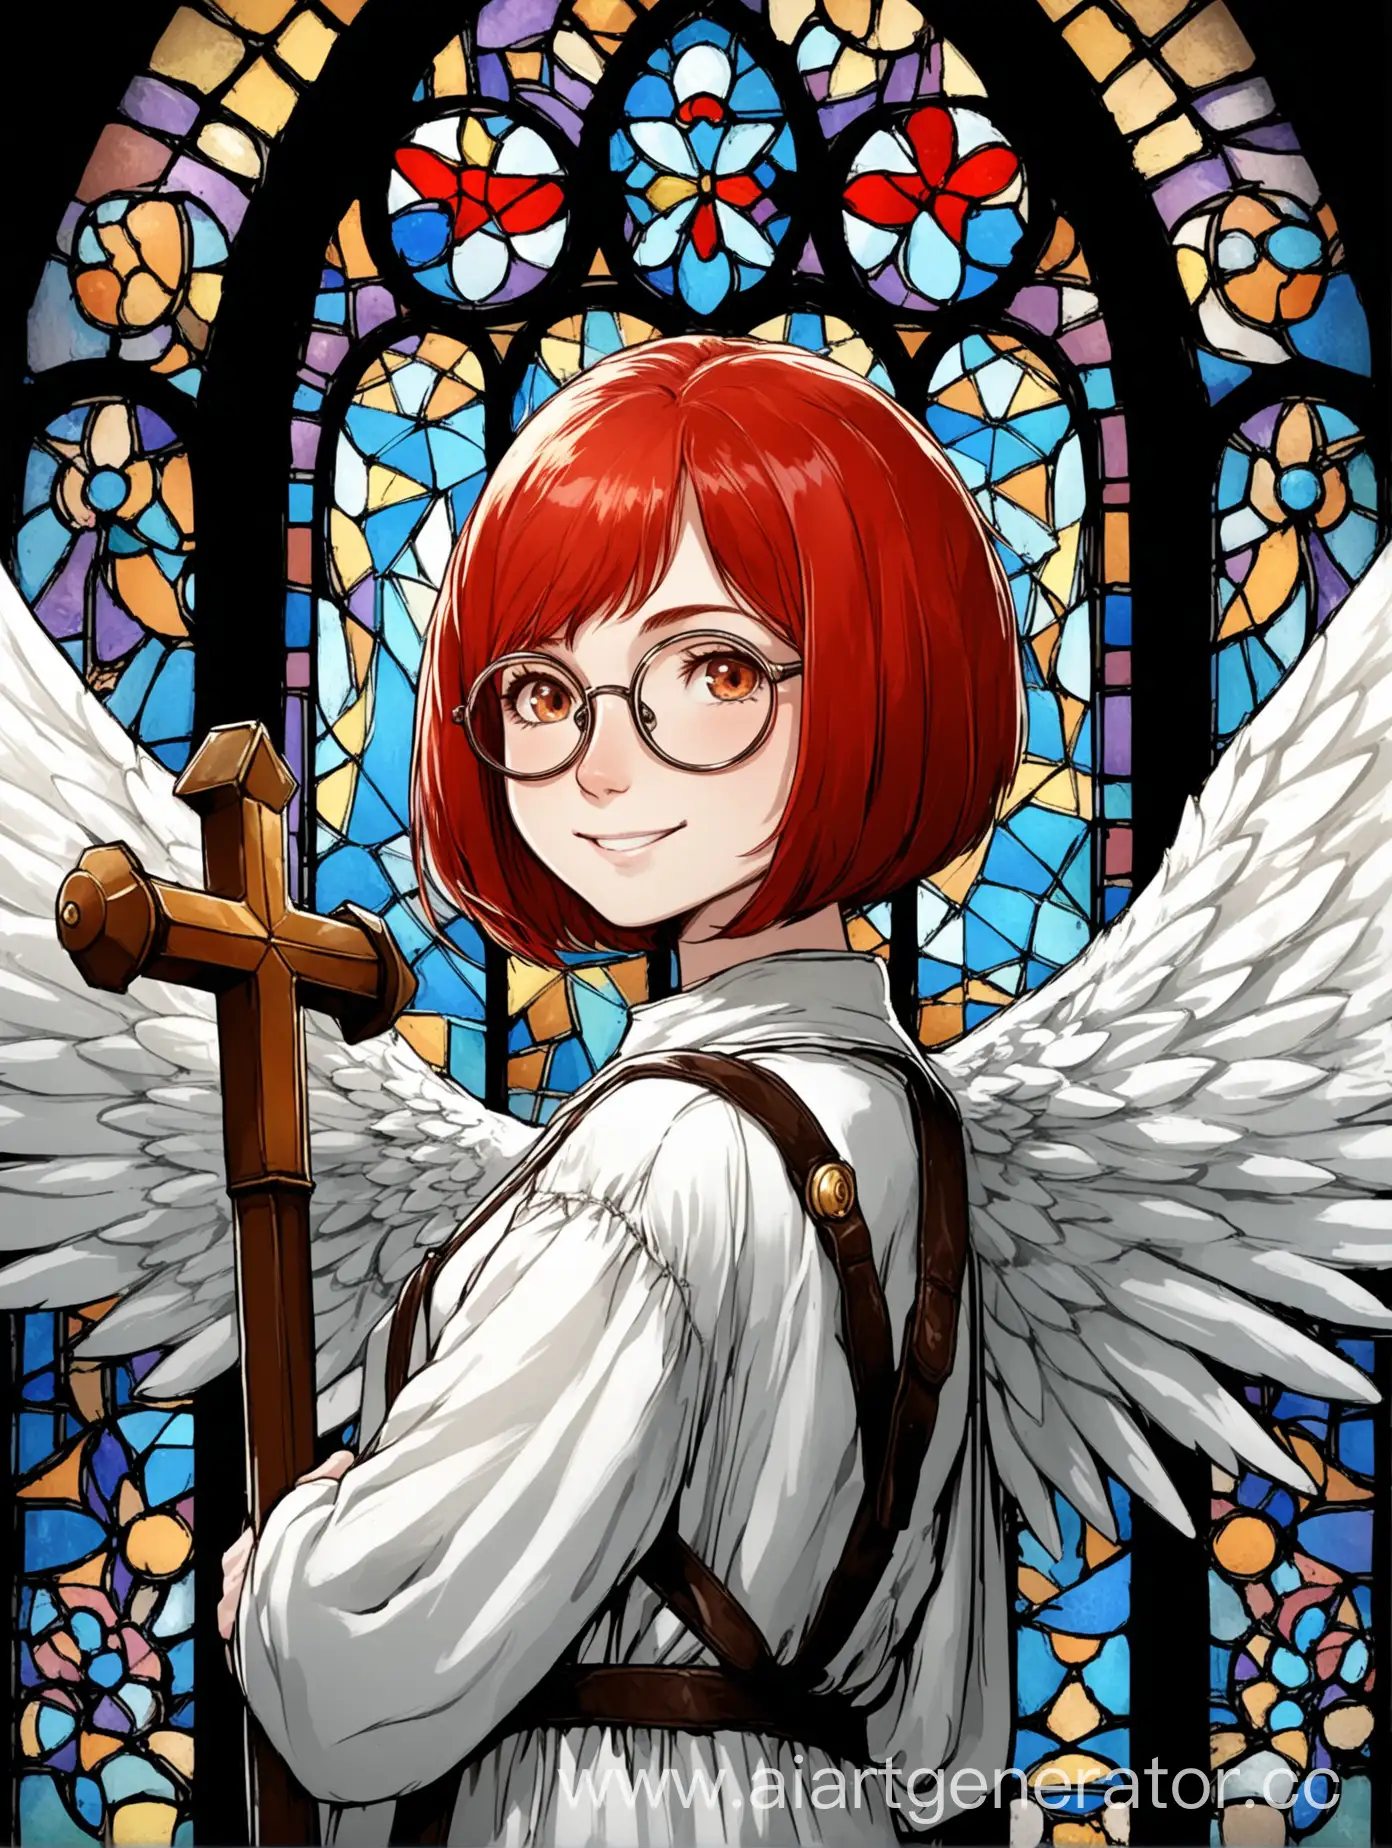 Innocent-Smiling-Girl-with-White-Wings-and-Staff-in-Fantasy-Setting